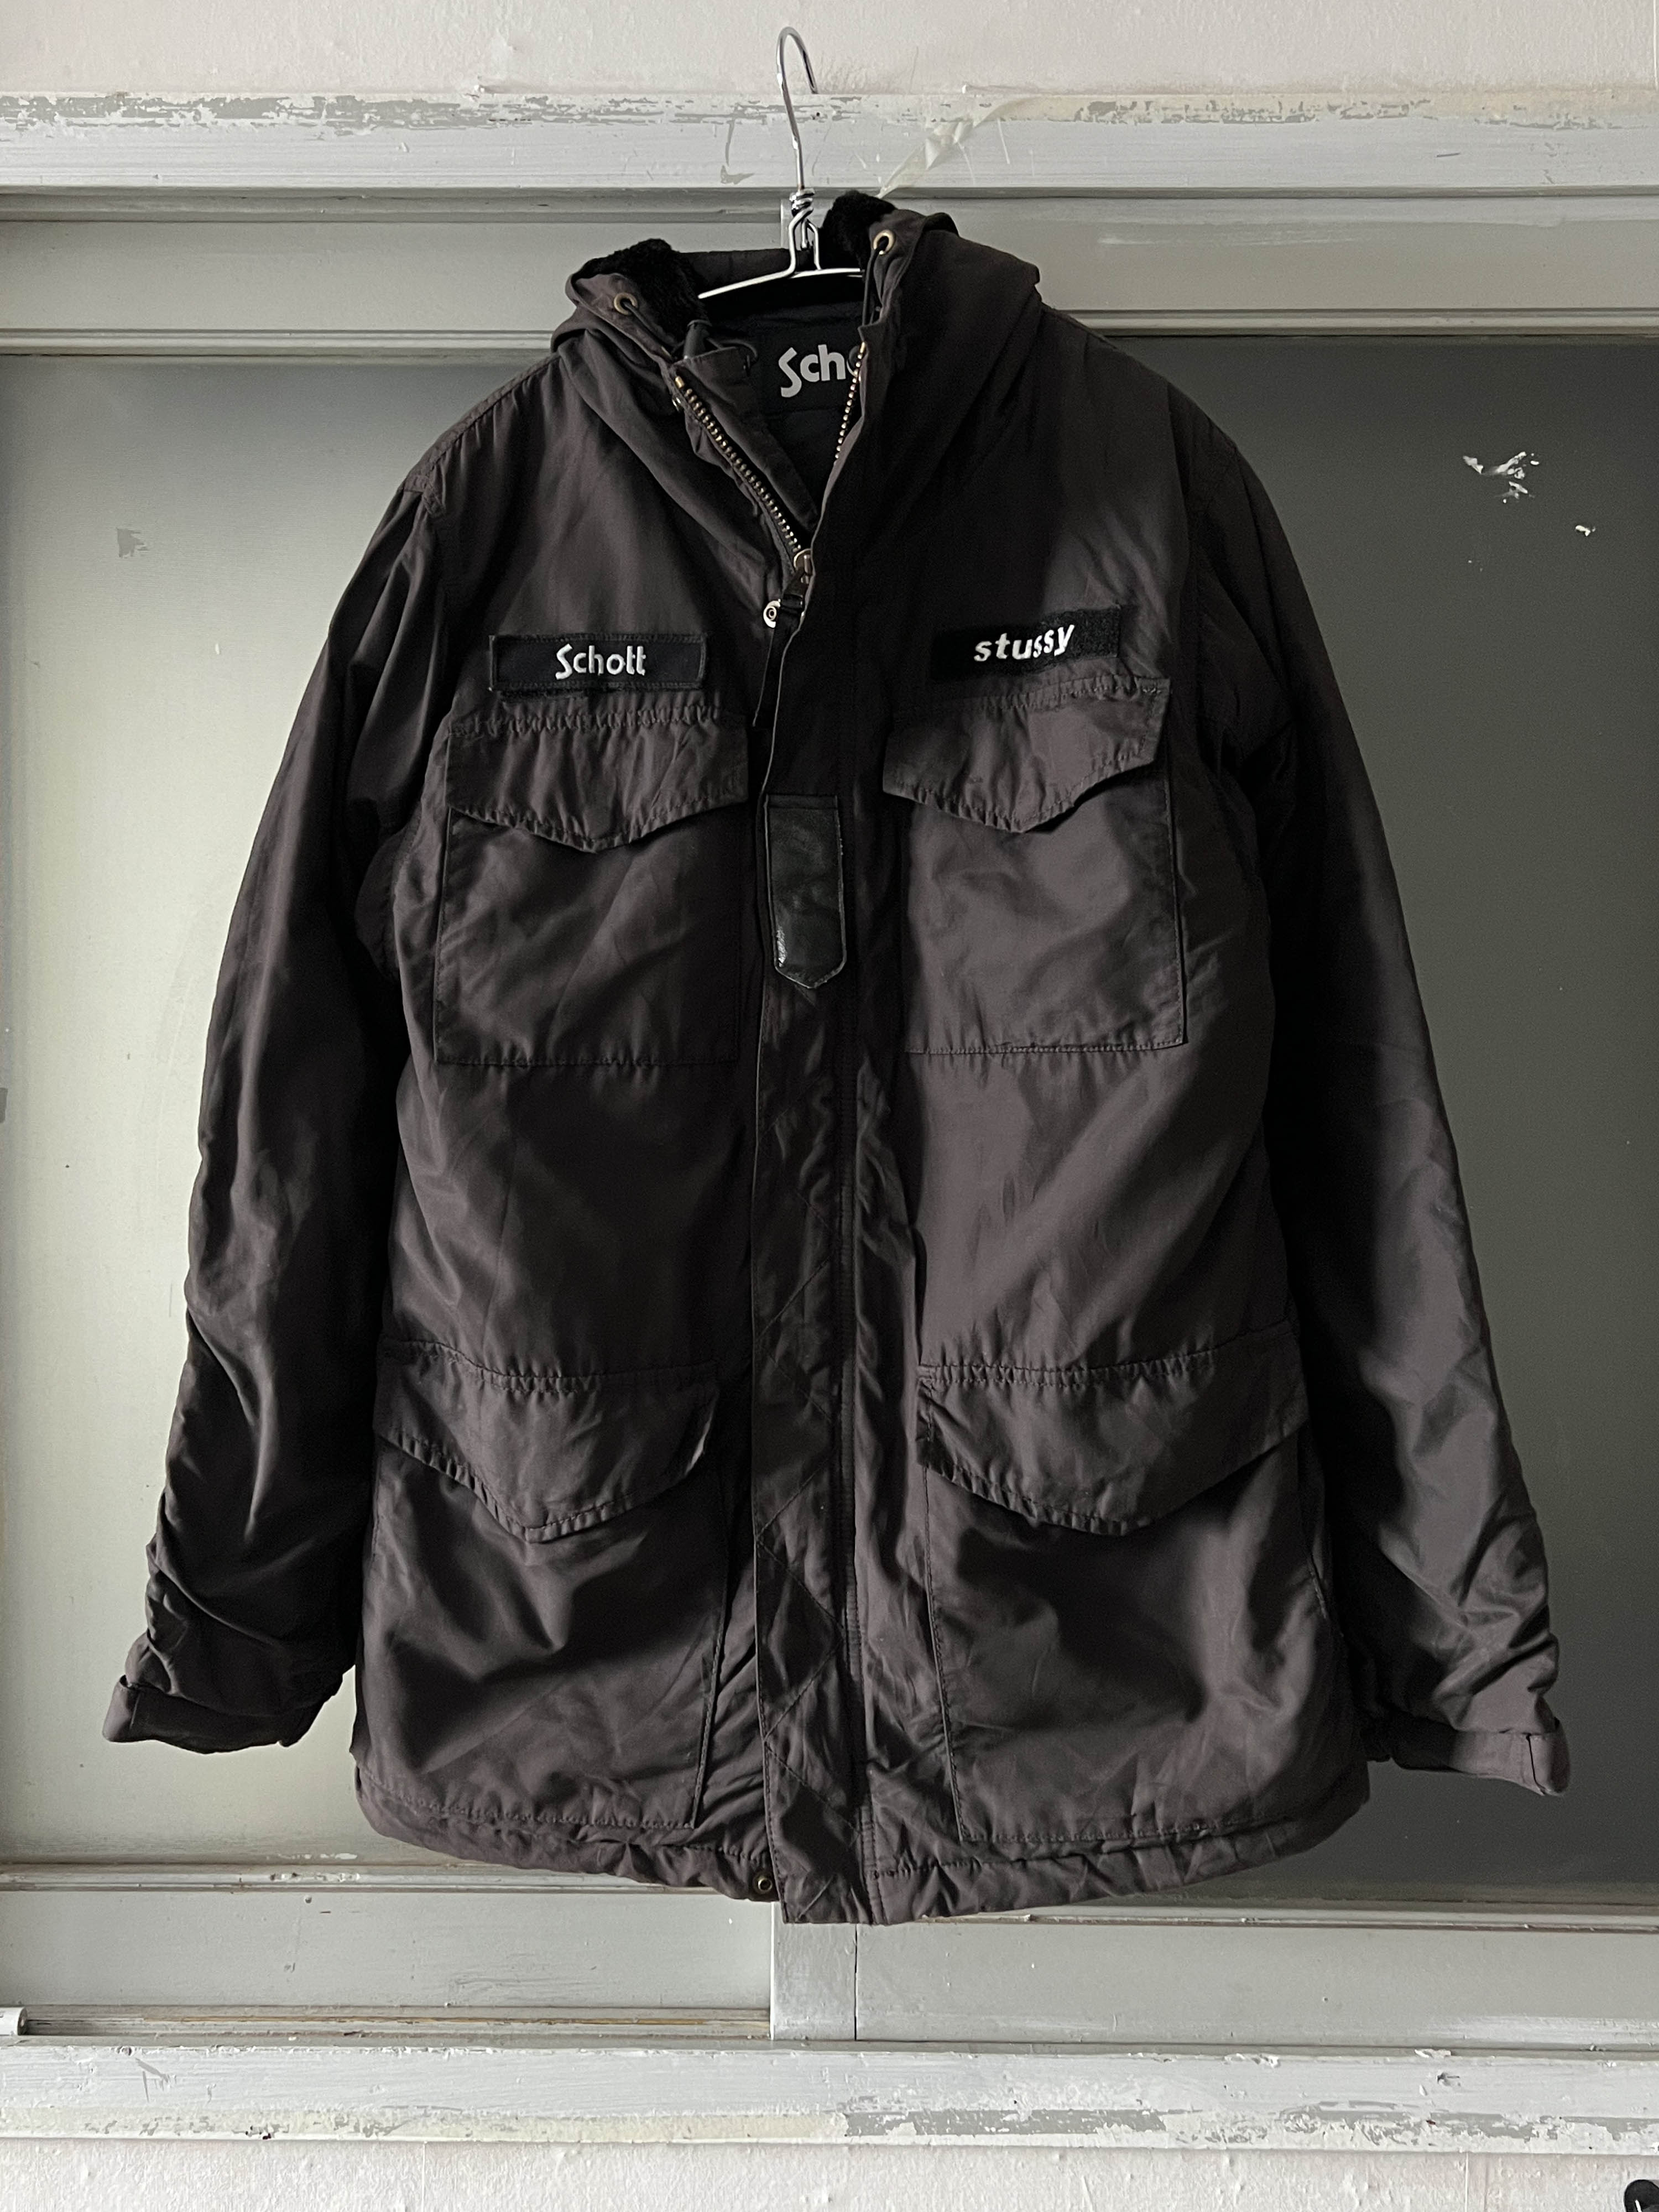 Stussy X Schott capsule collection millitary parka